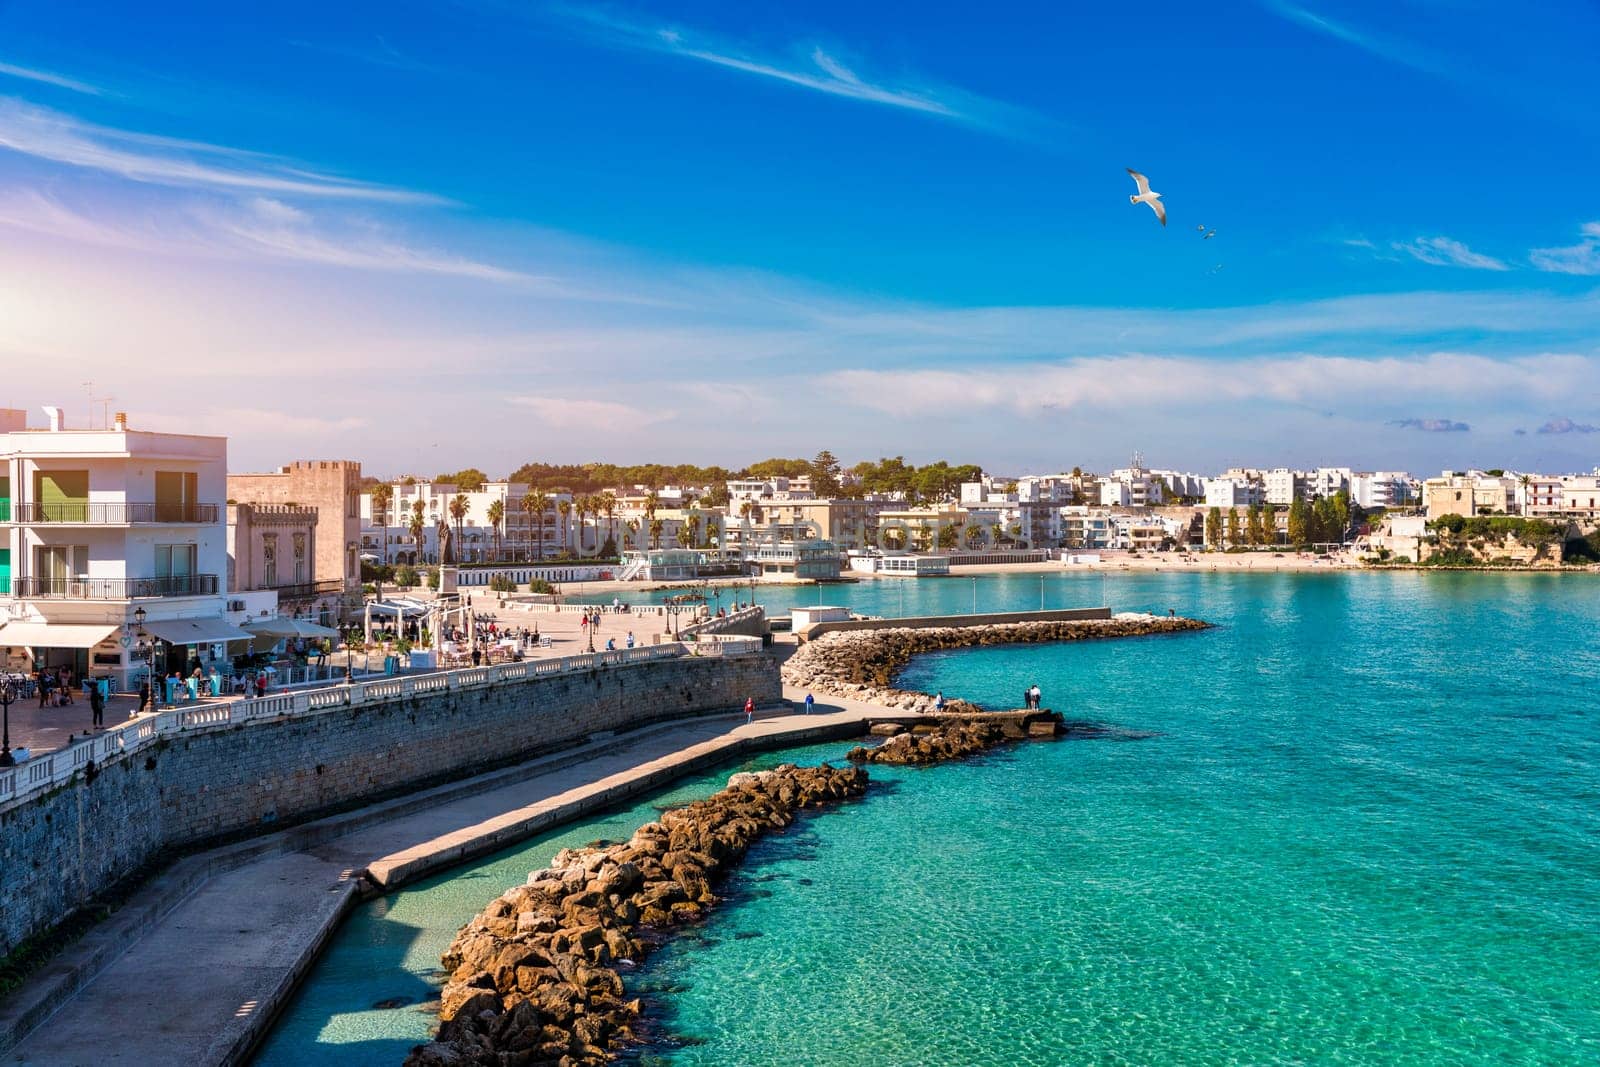 View of Otranto town on the Salento Peninsula in the south of Italy, Easternmost city in Italy (Apulia) on the coast of the Adriatic Sea. View of Otranto town, Puglia region, Italy. by DaLiu